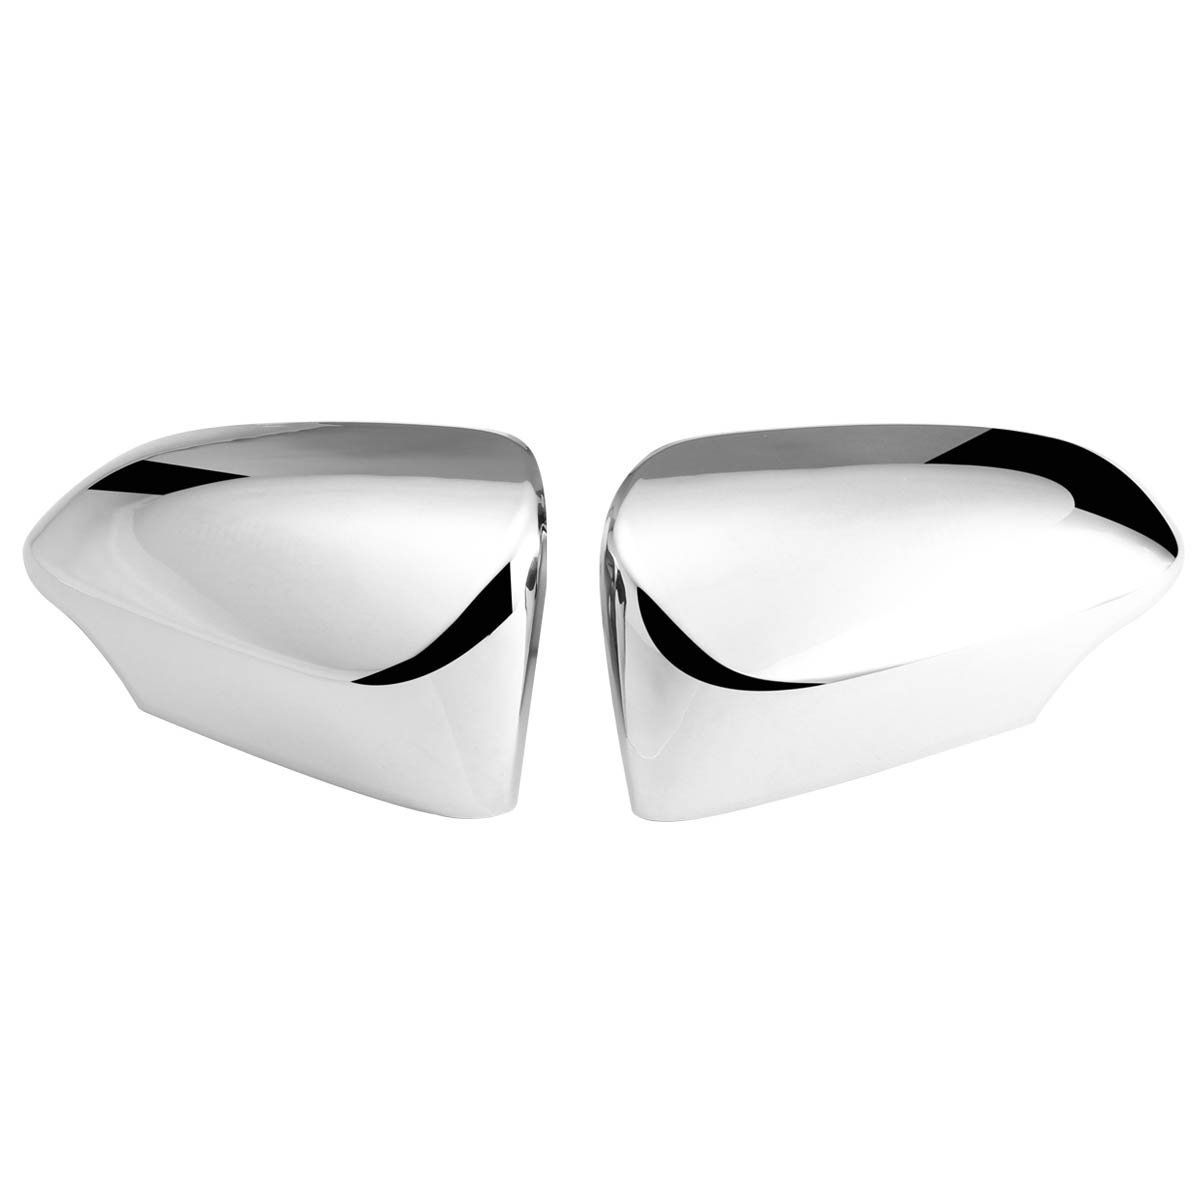 SIDE MIRROR COVERS FOR HYUNDAI i10 GRAND (SET OF 2PCS)